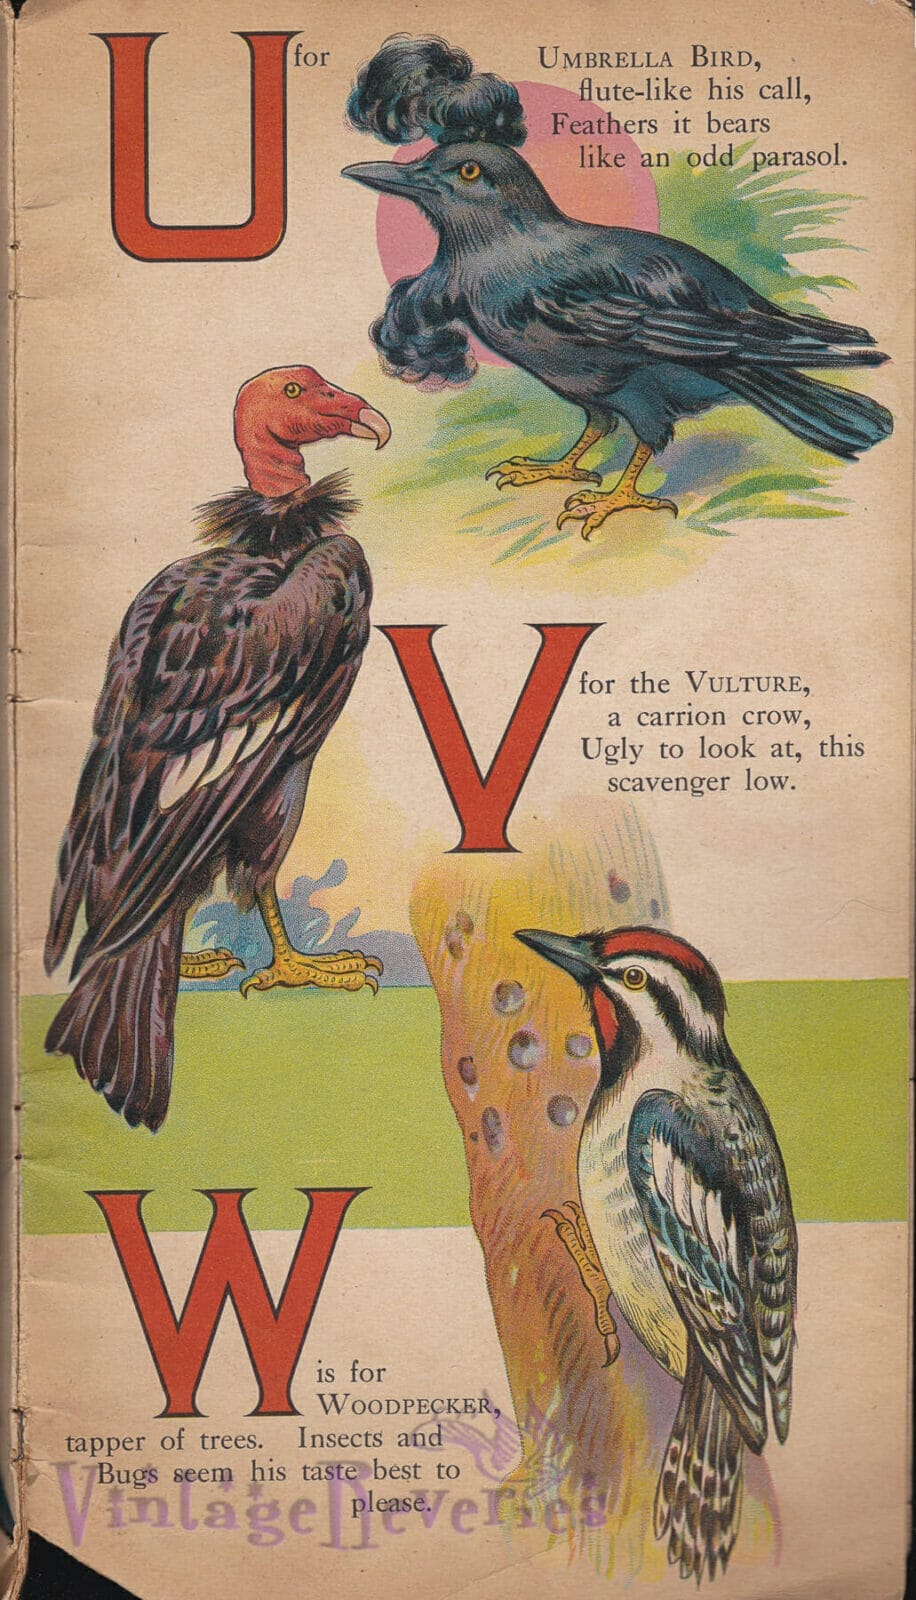 Birds that begin with letters U V and W